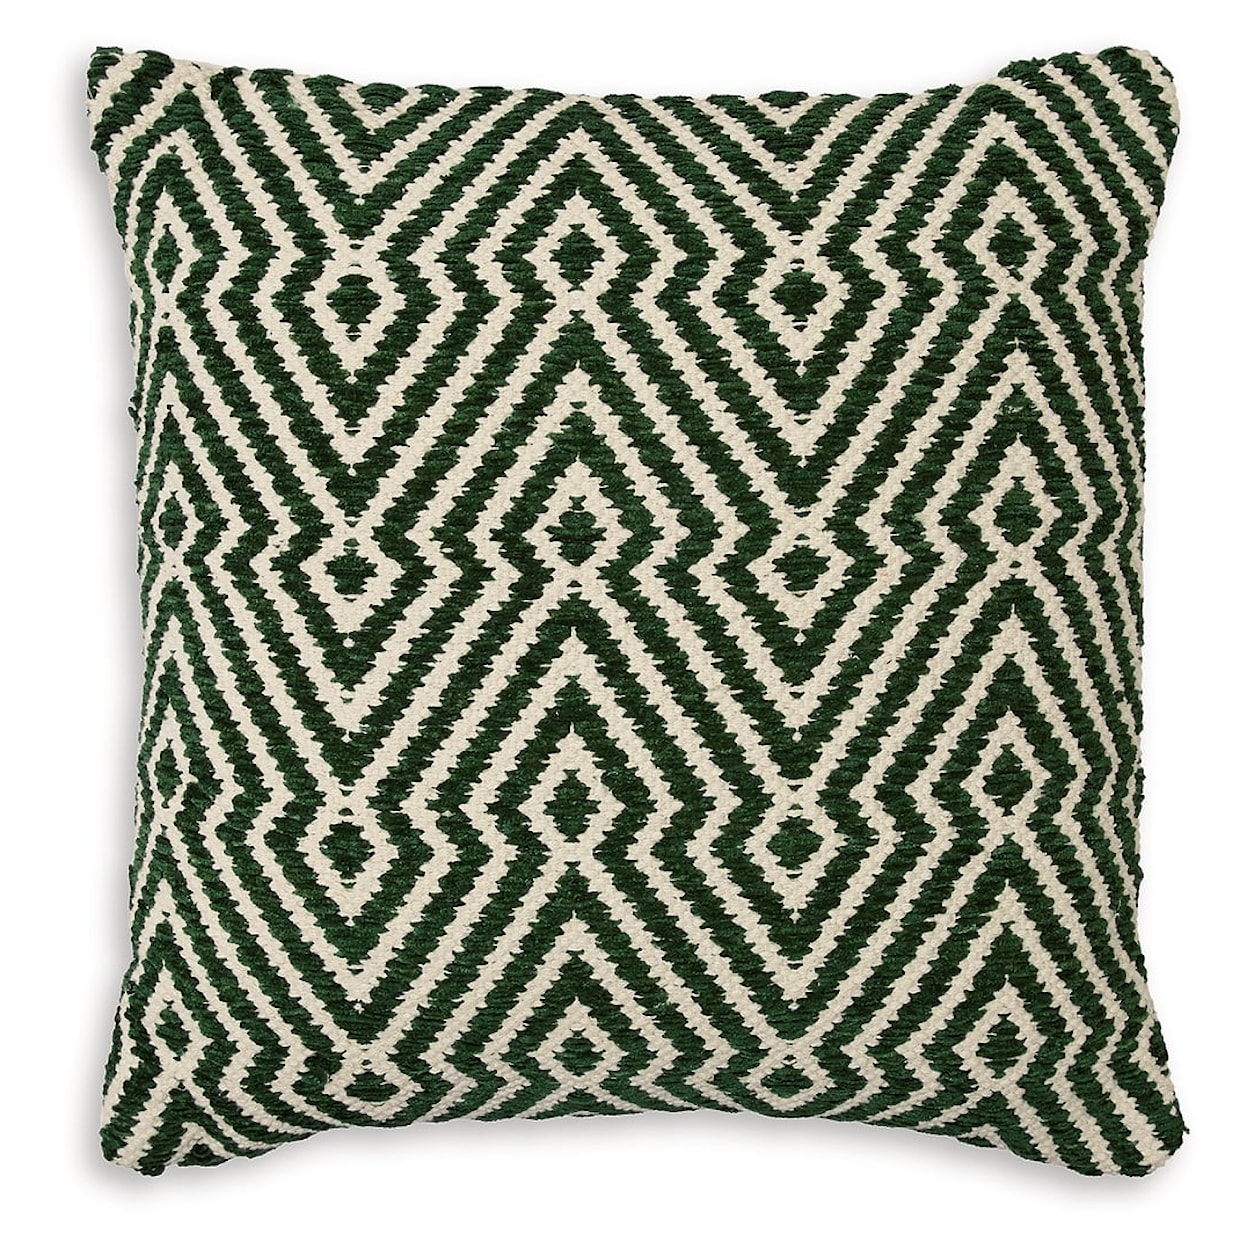 Signature Design by Ashley Digover Pillow